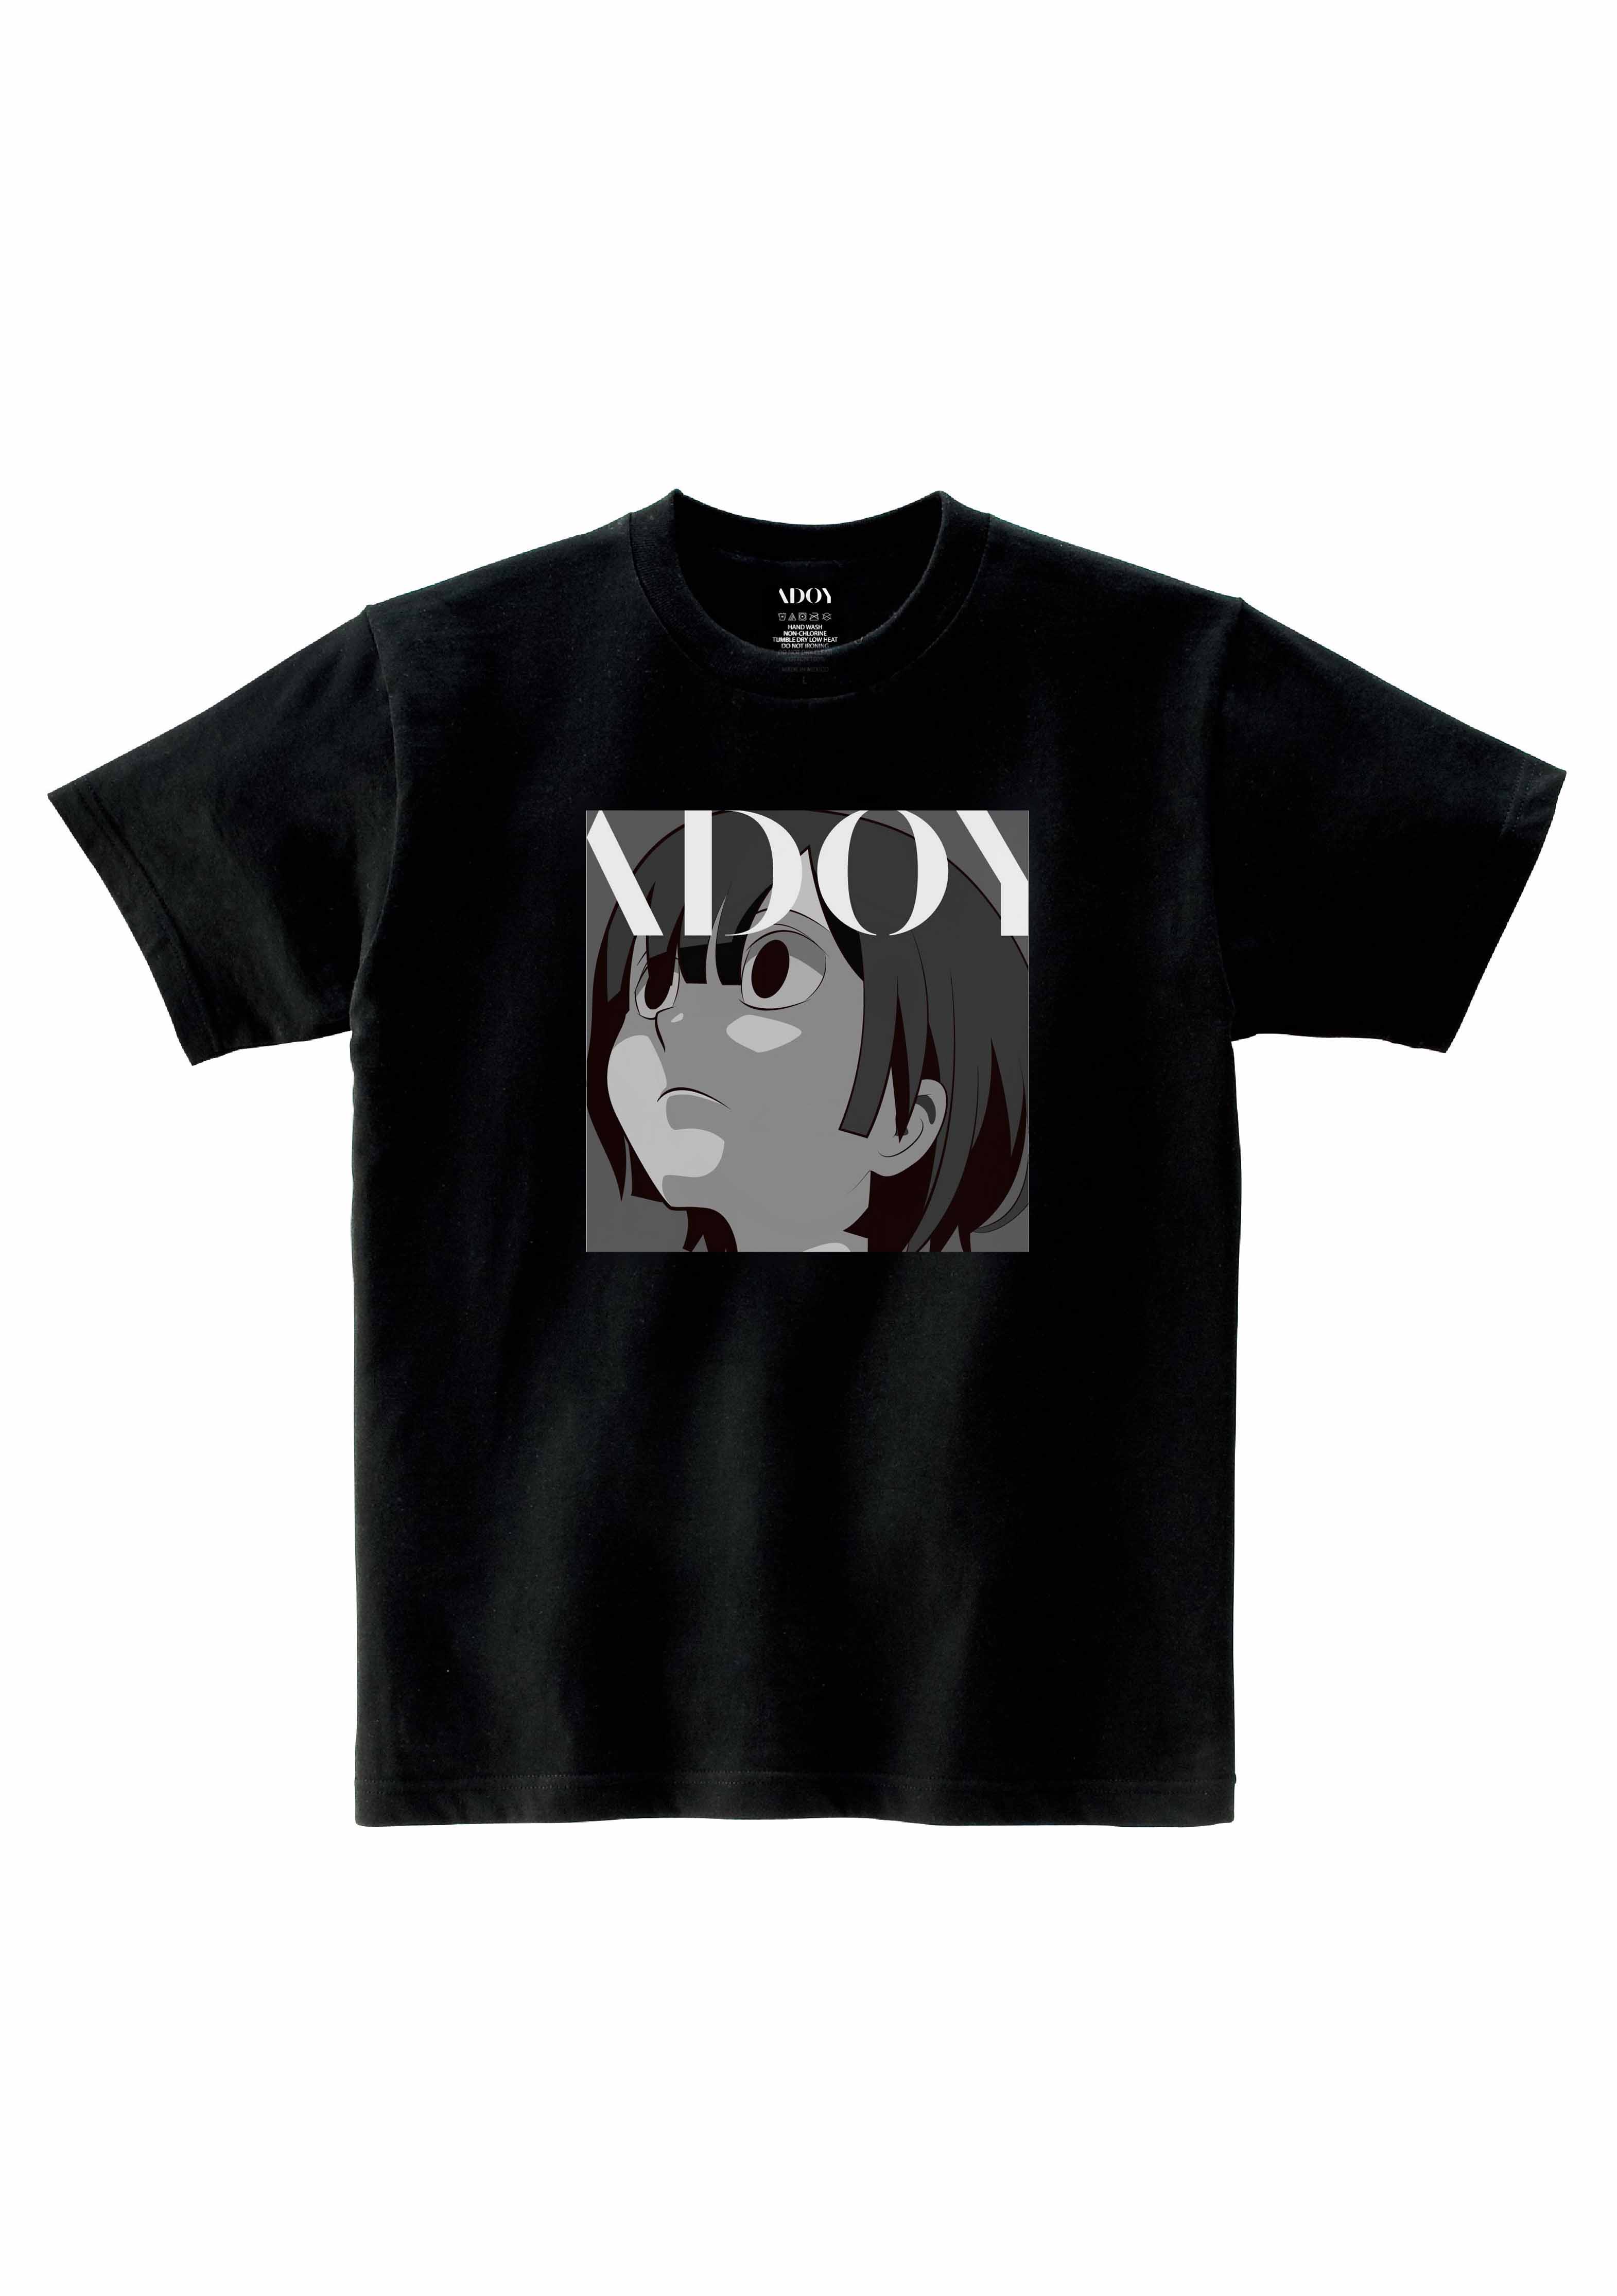 ADOY Collection Line T-Shirt (Pool Black)